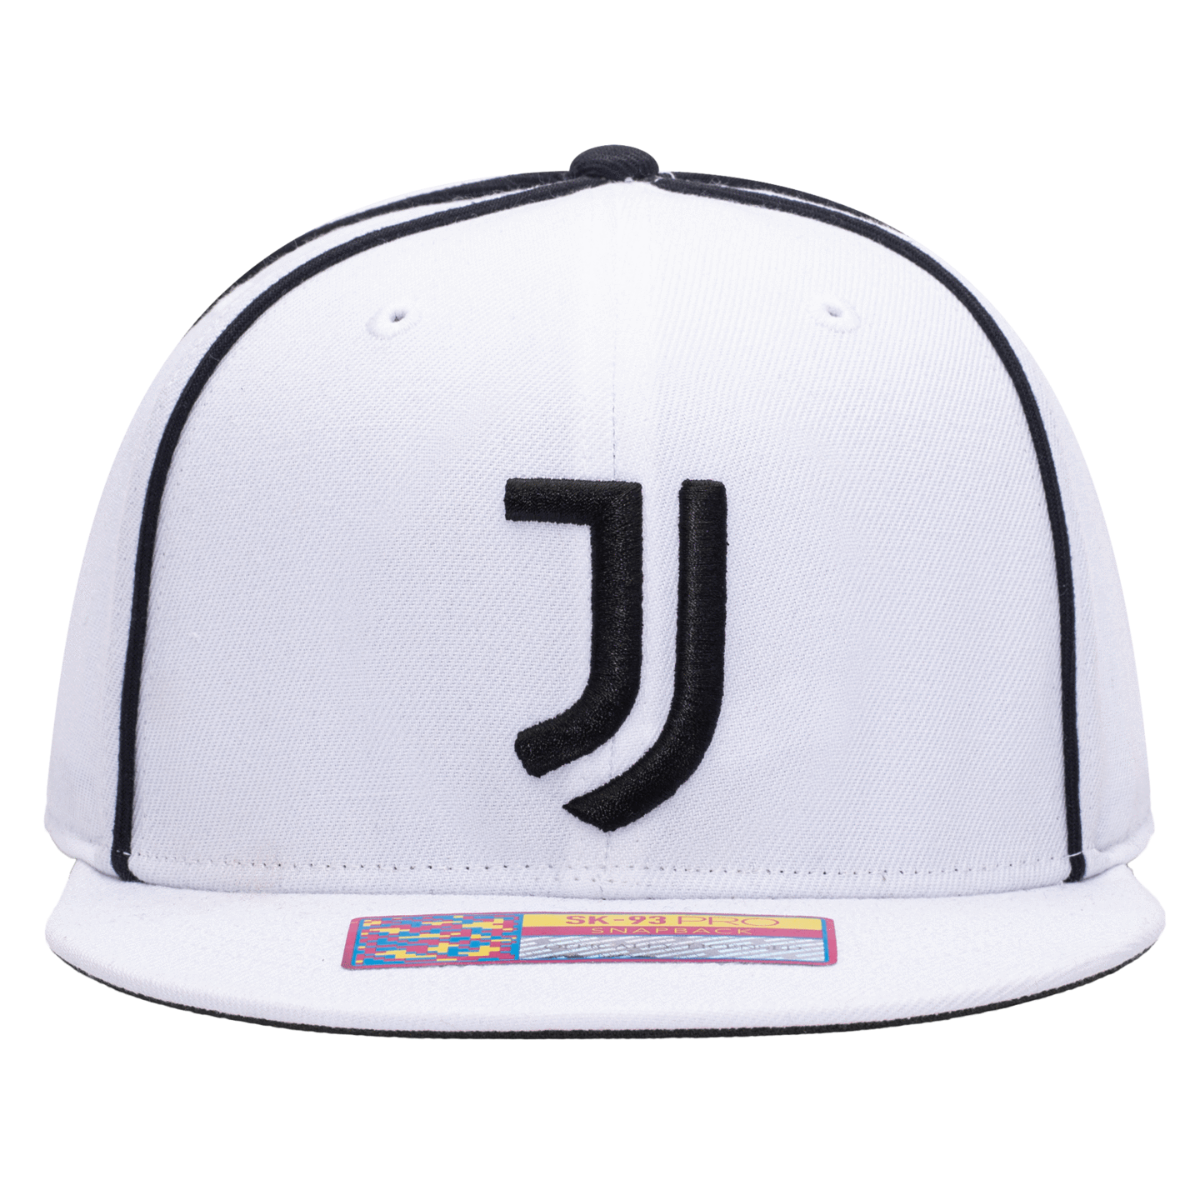 FI Collection Juventus Cali Day Snapback Hat - White-Black (Front)